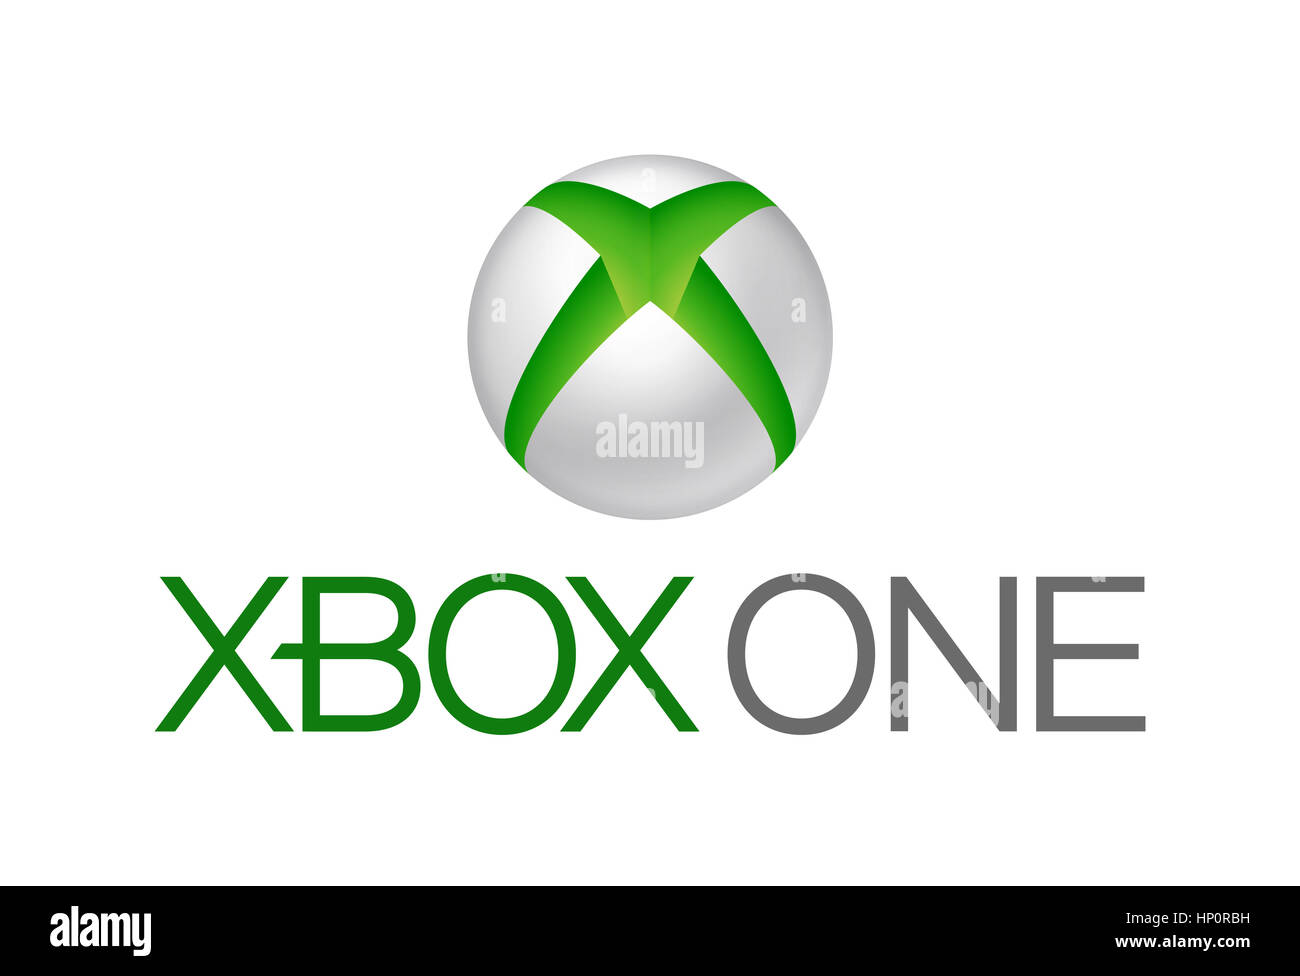 Xbox Logo High Resolution Stock Photography and Images - Alamy